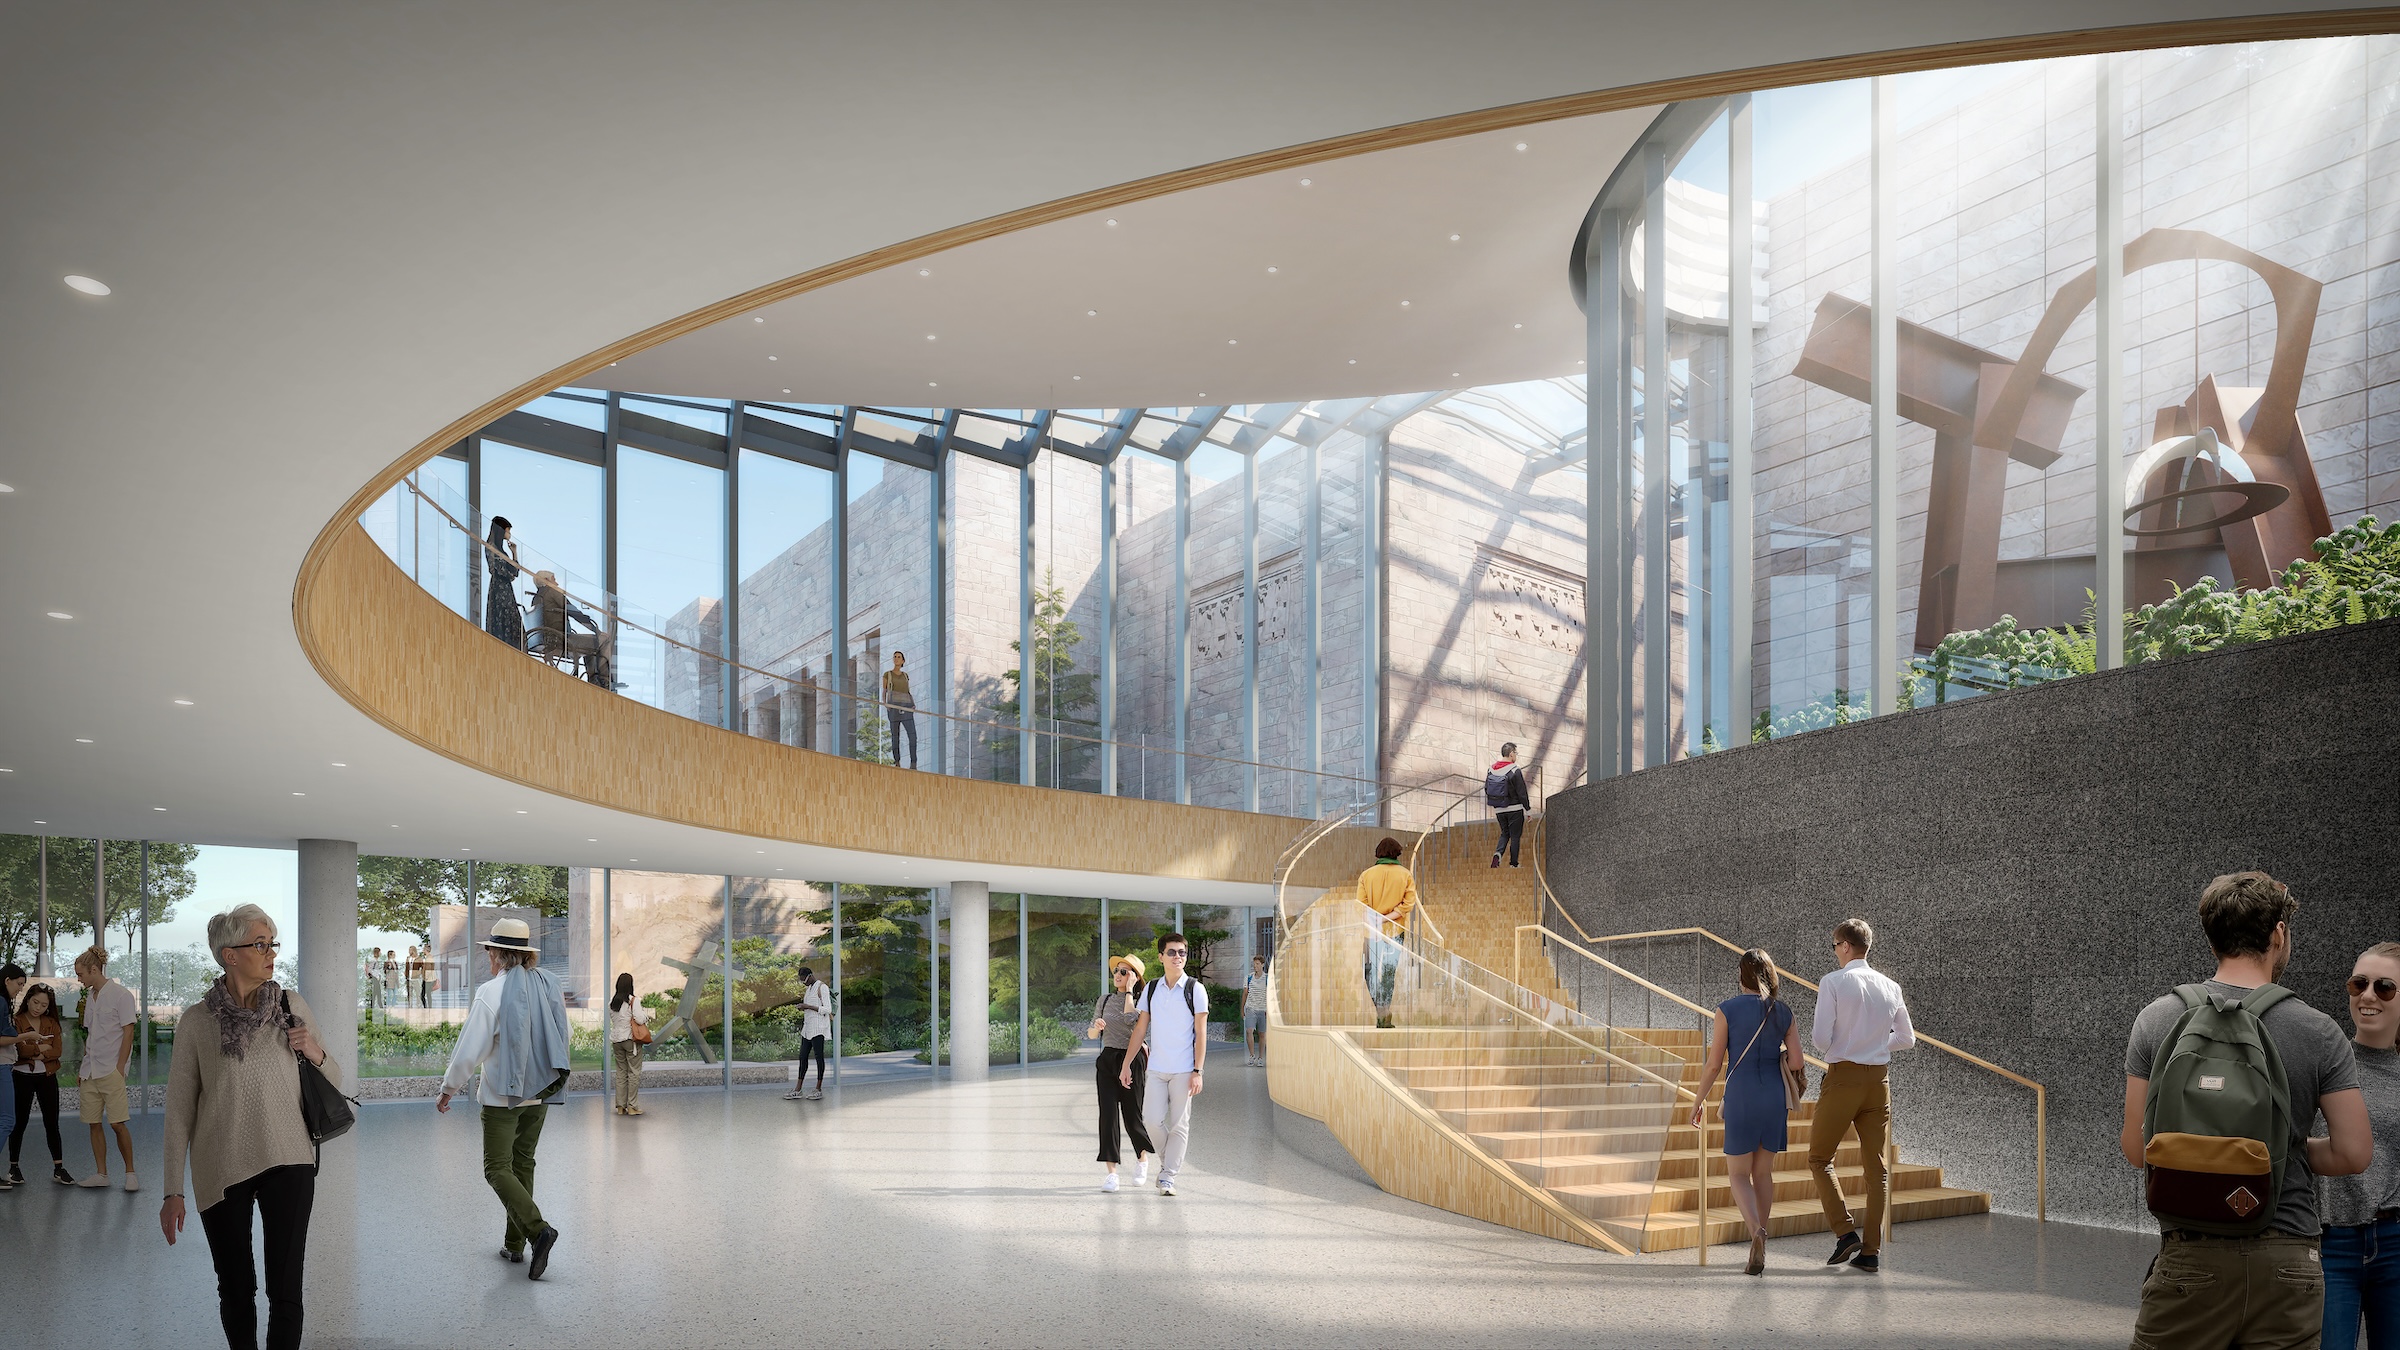 Hawks Pavilion entry atrium with views of the Joslyn Building, Scott Pavilion, and arrival garden. Rendering courtesy Moare